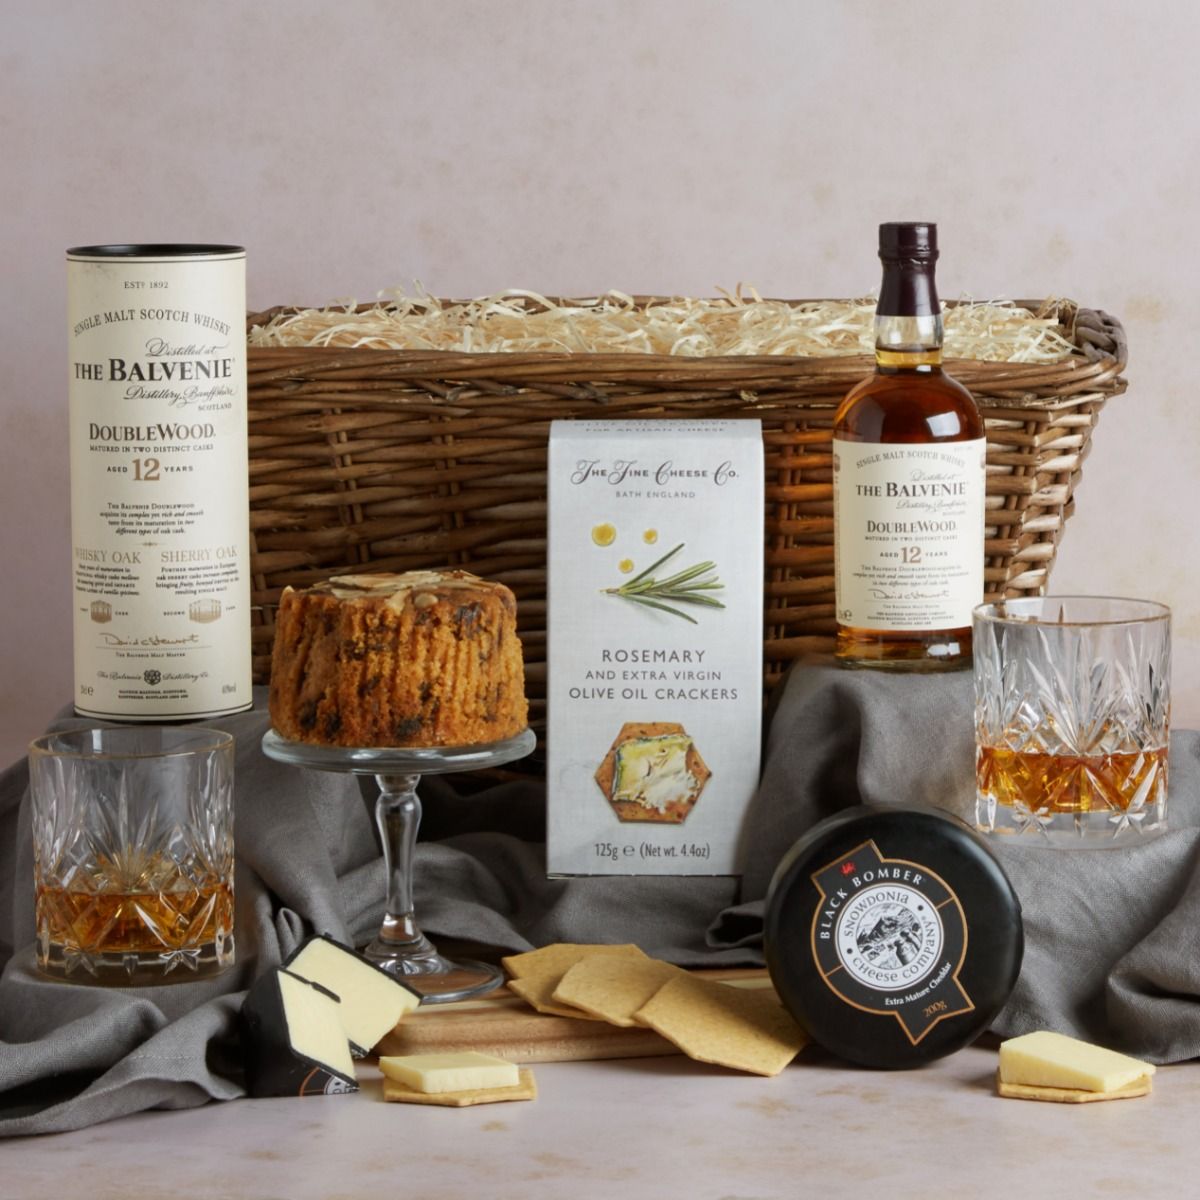 Premium Whisky and Food Gift Basket with contents on display including a bottle of Balvenie